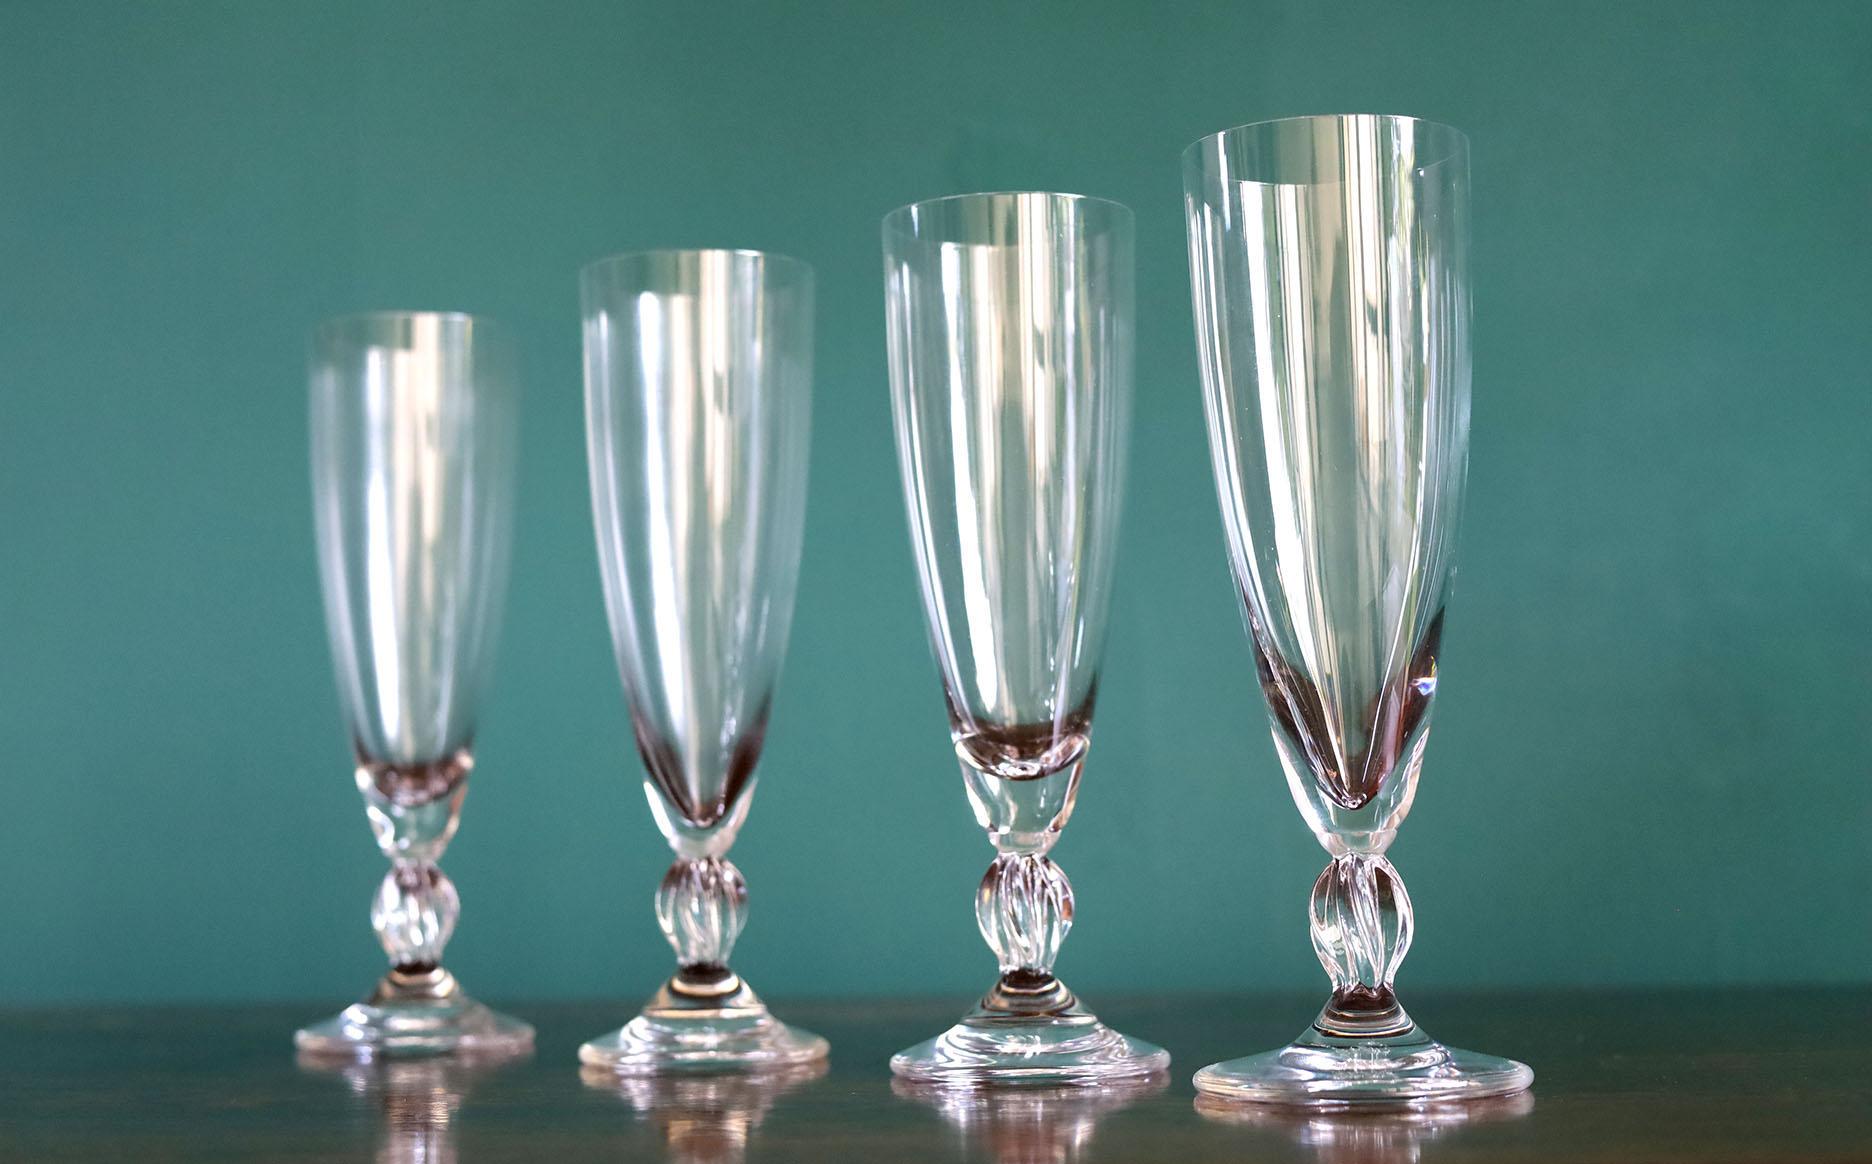 Very elegant set of 4 Champagne Flutes.
amazing condition, probably never used.
Made by the top quality and crystal manufacturer icon Lalique France.

 